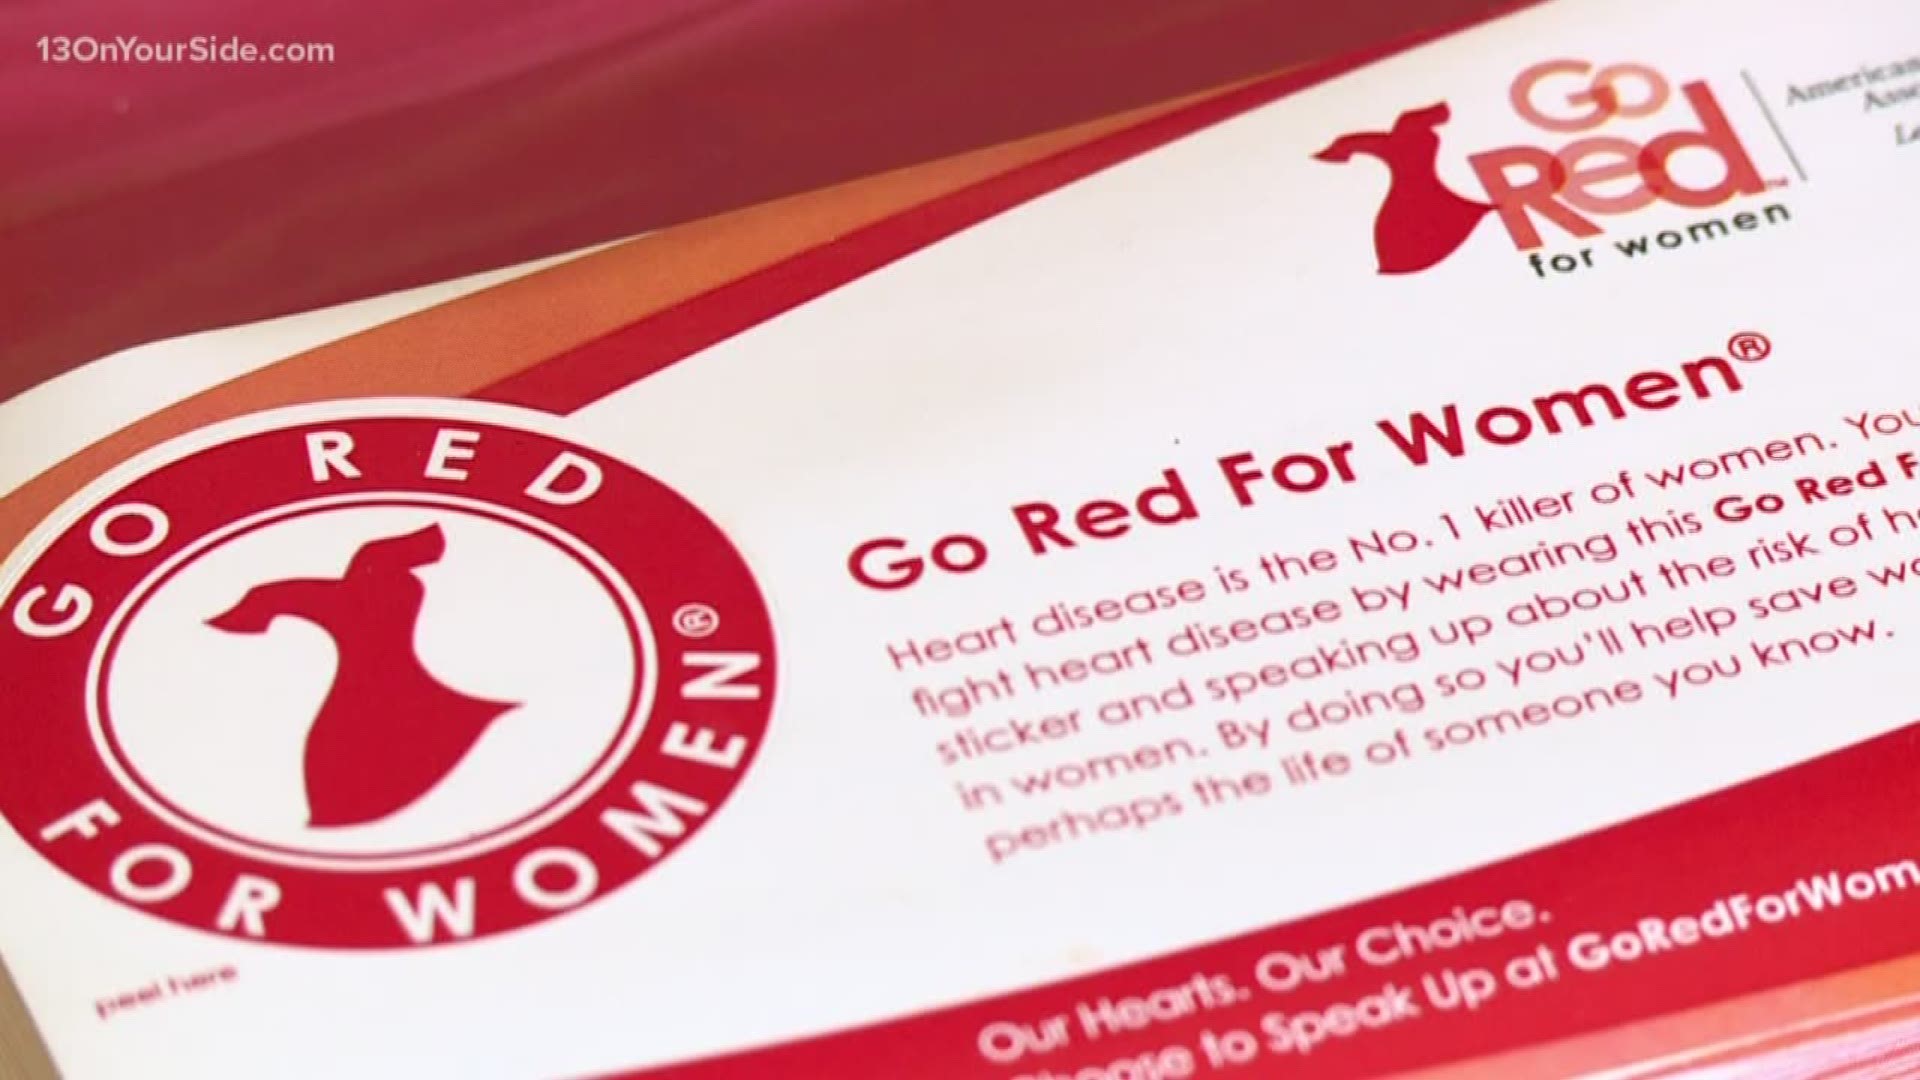 Go Red For Women campaign raises awareness about heart disease in women